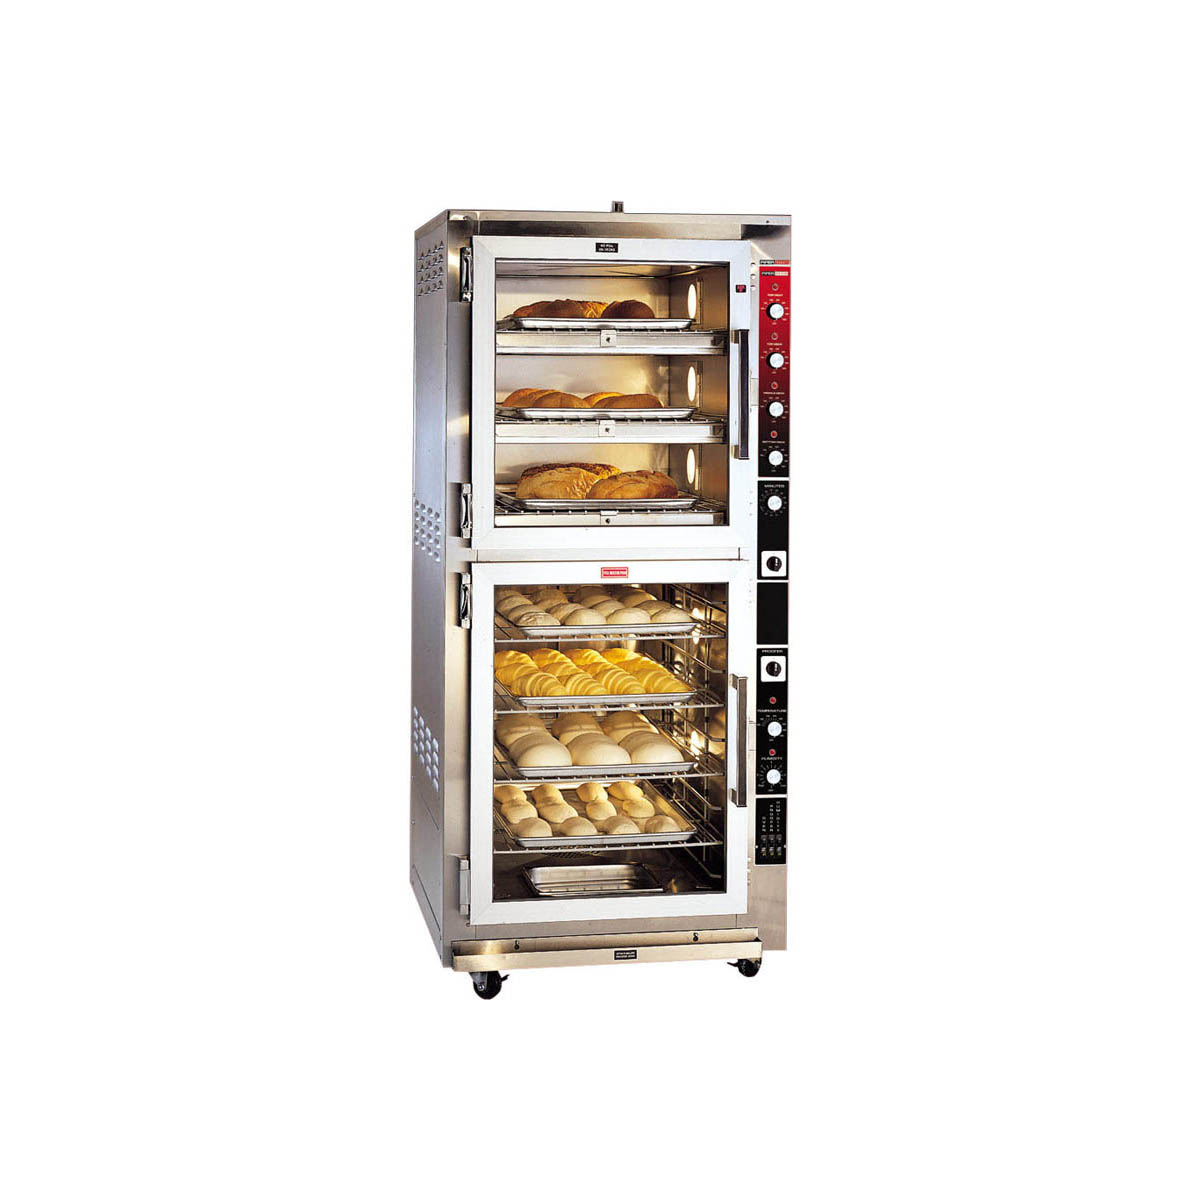 Piper Products OP-3 Full Size Electric Oven/Proofer Combo